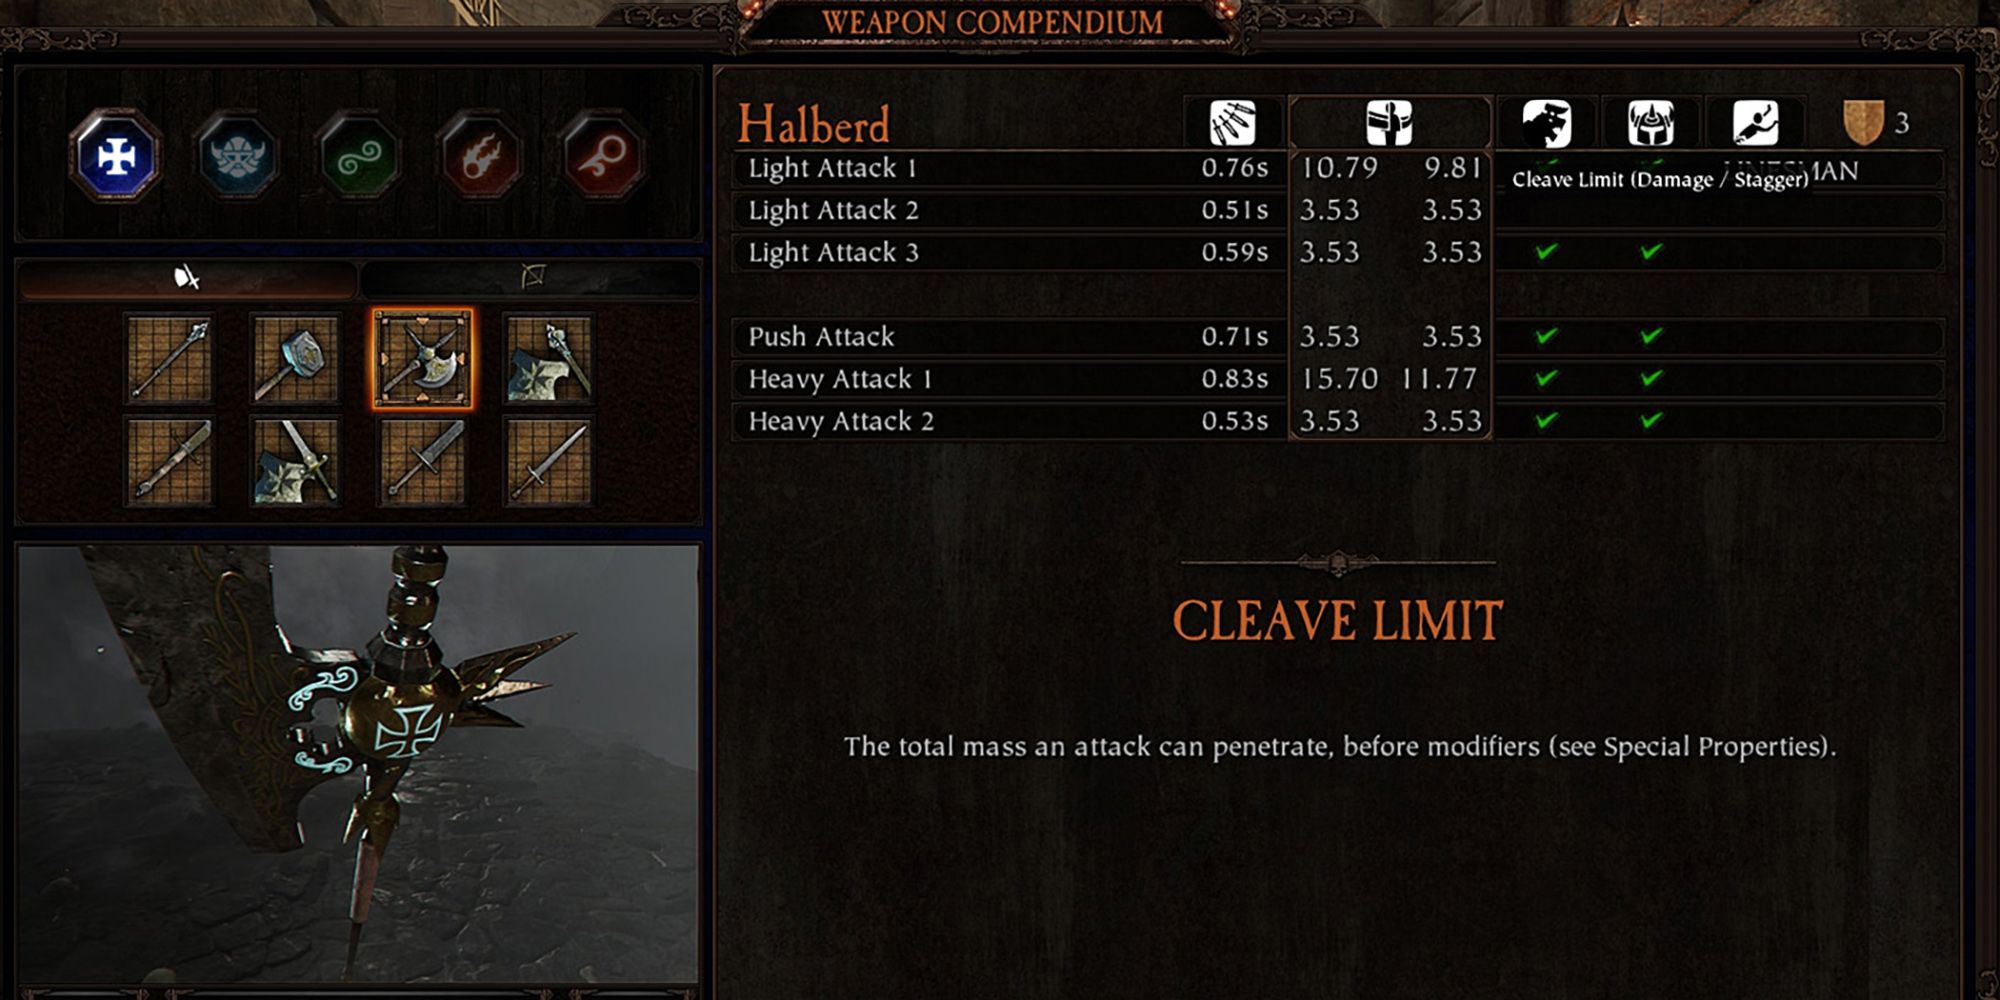 Warhammer-Vermintide-2---Looking-At-The-Hyper-Specific-Stats-Of-A-Halberd-In-The-Armory-Mod-2